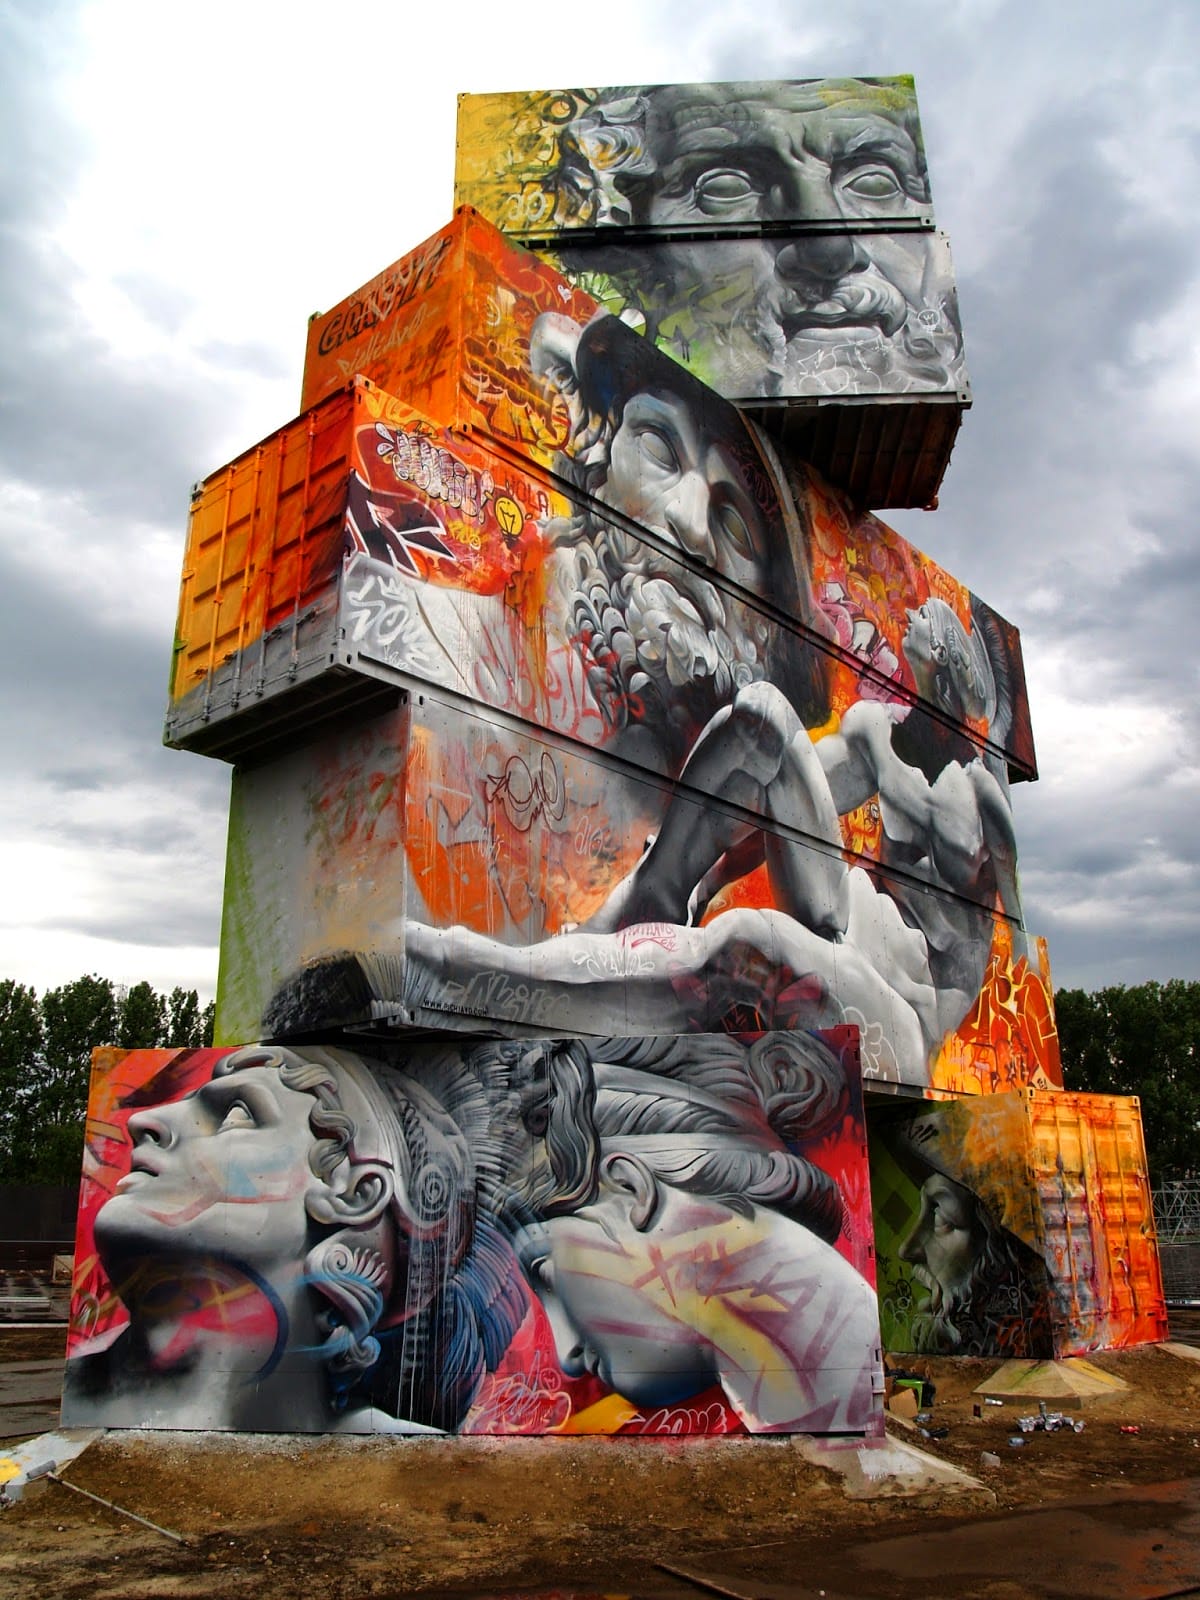 Impressive Monumental Murals That Blend Classical Figures And Graffiti By Pichiavo (18)